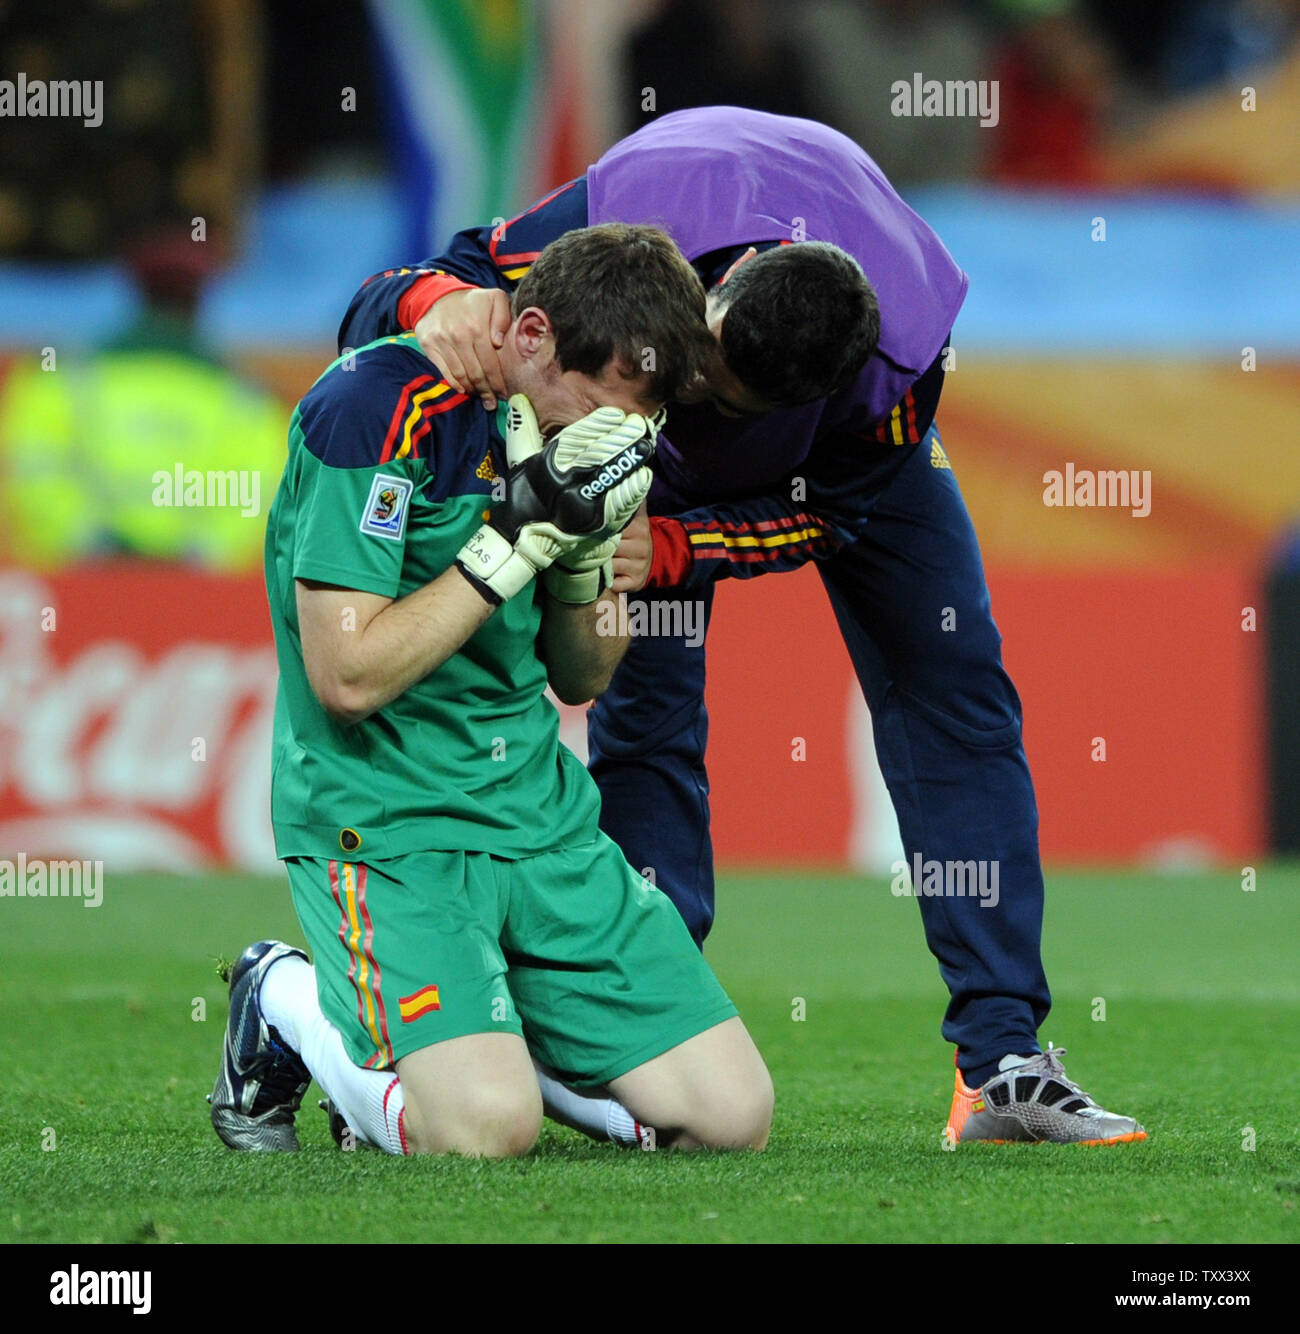 Iker Casillas of Spain is overcome with emotion following the FIFA World Cup Final match at Soccer City Stadium in Johannesburg, South Africa on July 11, 2010. UPI/Chris Brunskill Stock Photo